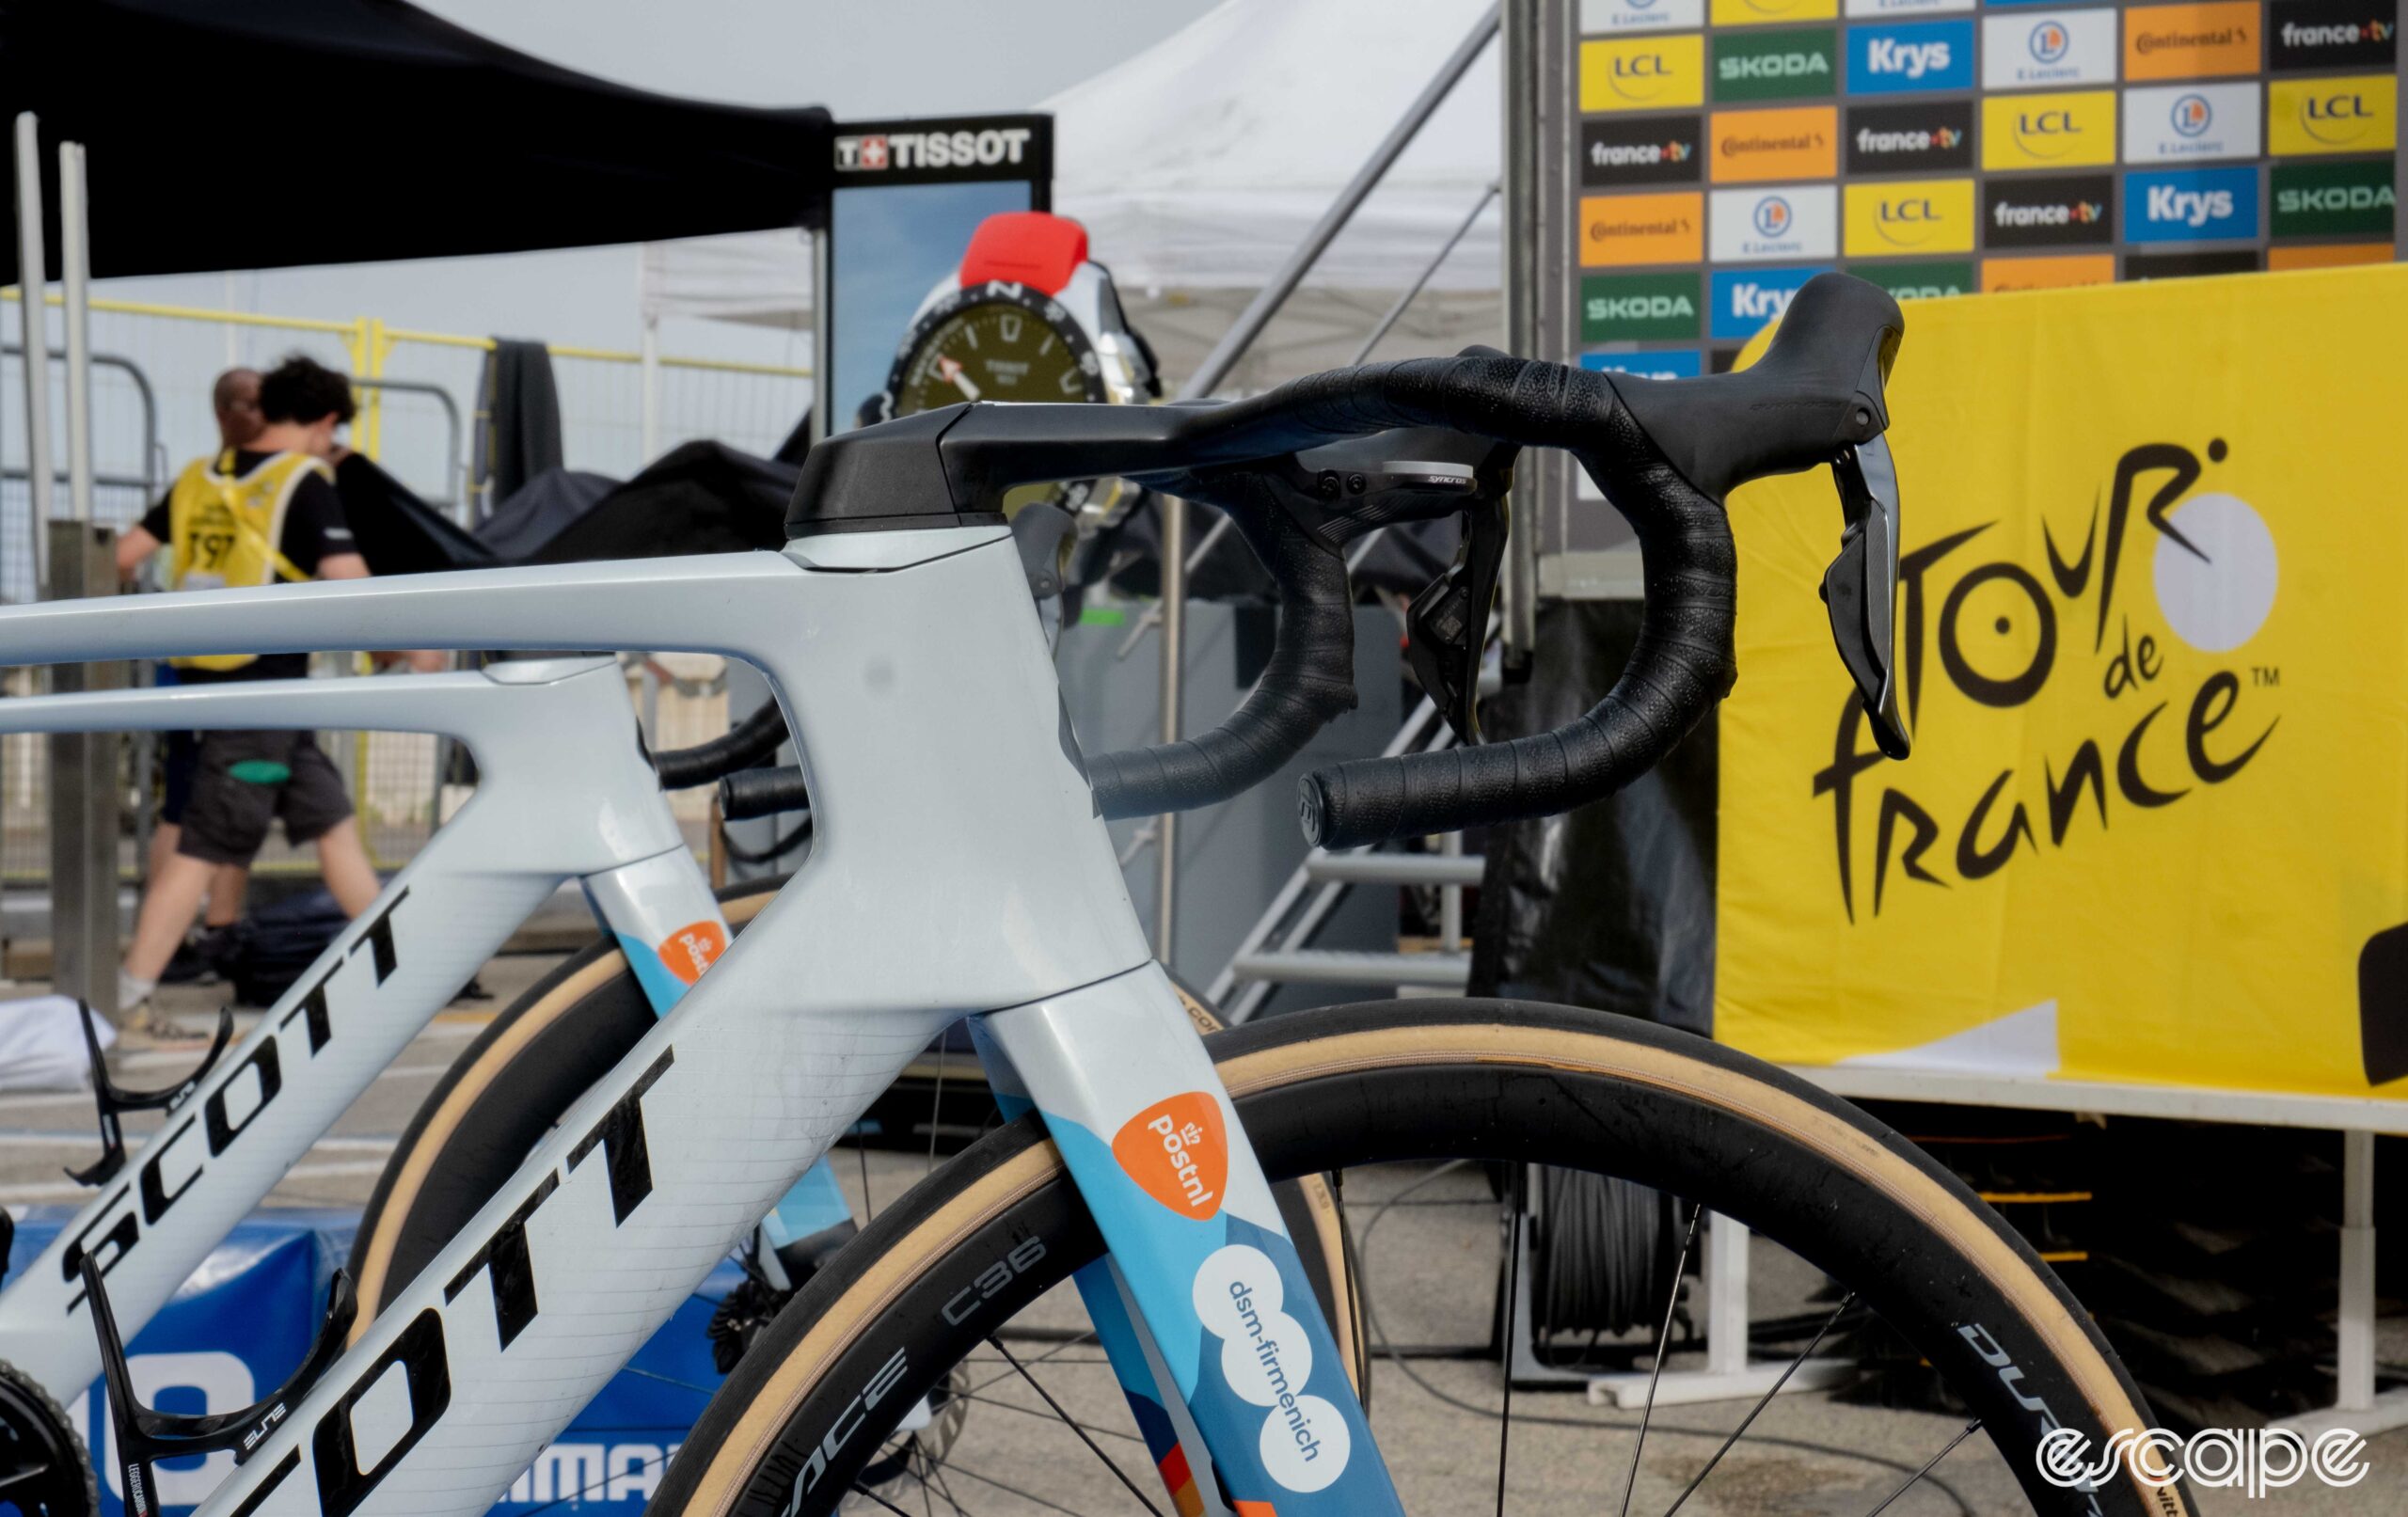 The photo shows Bardet's integrated handlebars.